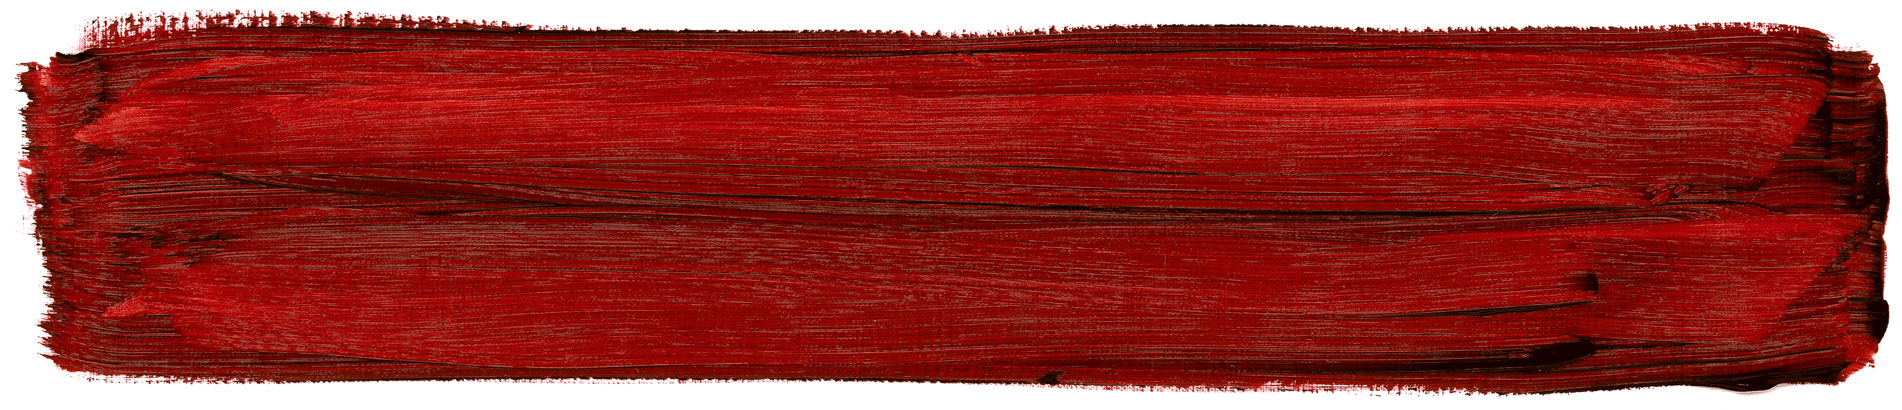 madder root red